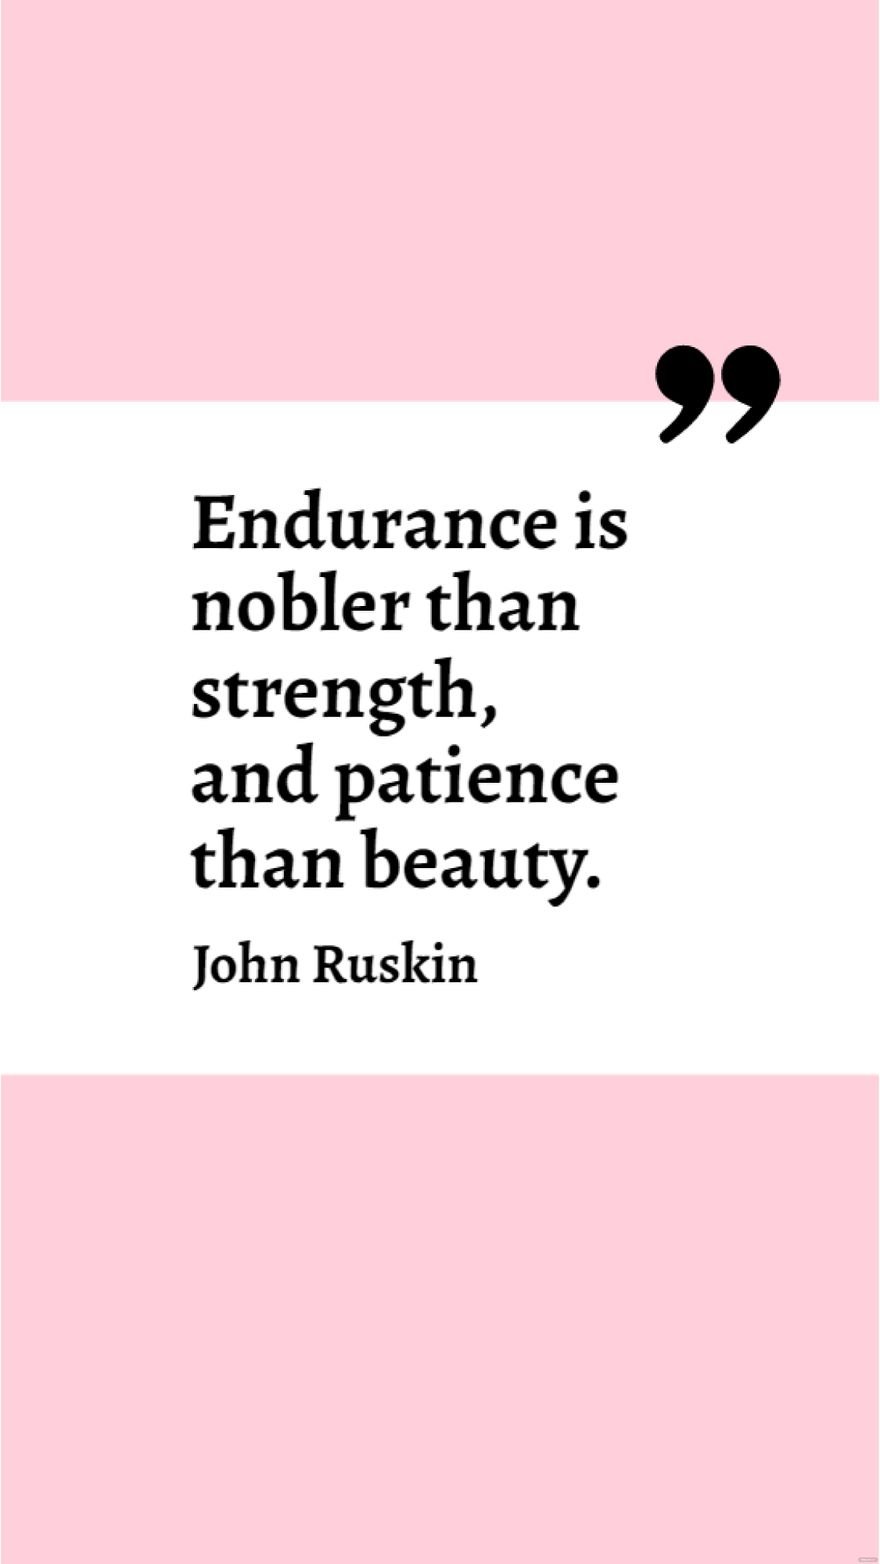 John Ruskin - Endurance is nobler than strength, and patience than beauty. in JPG